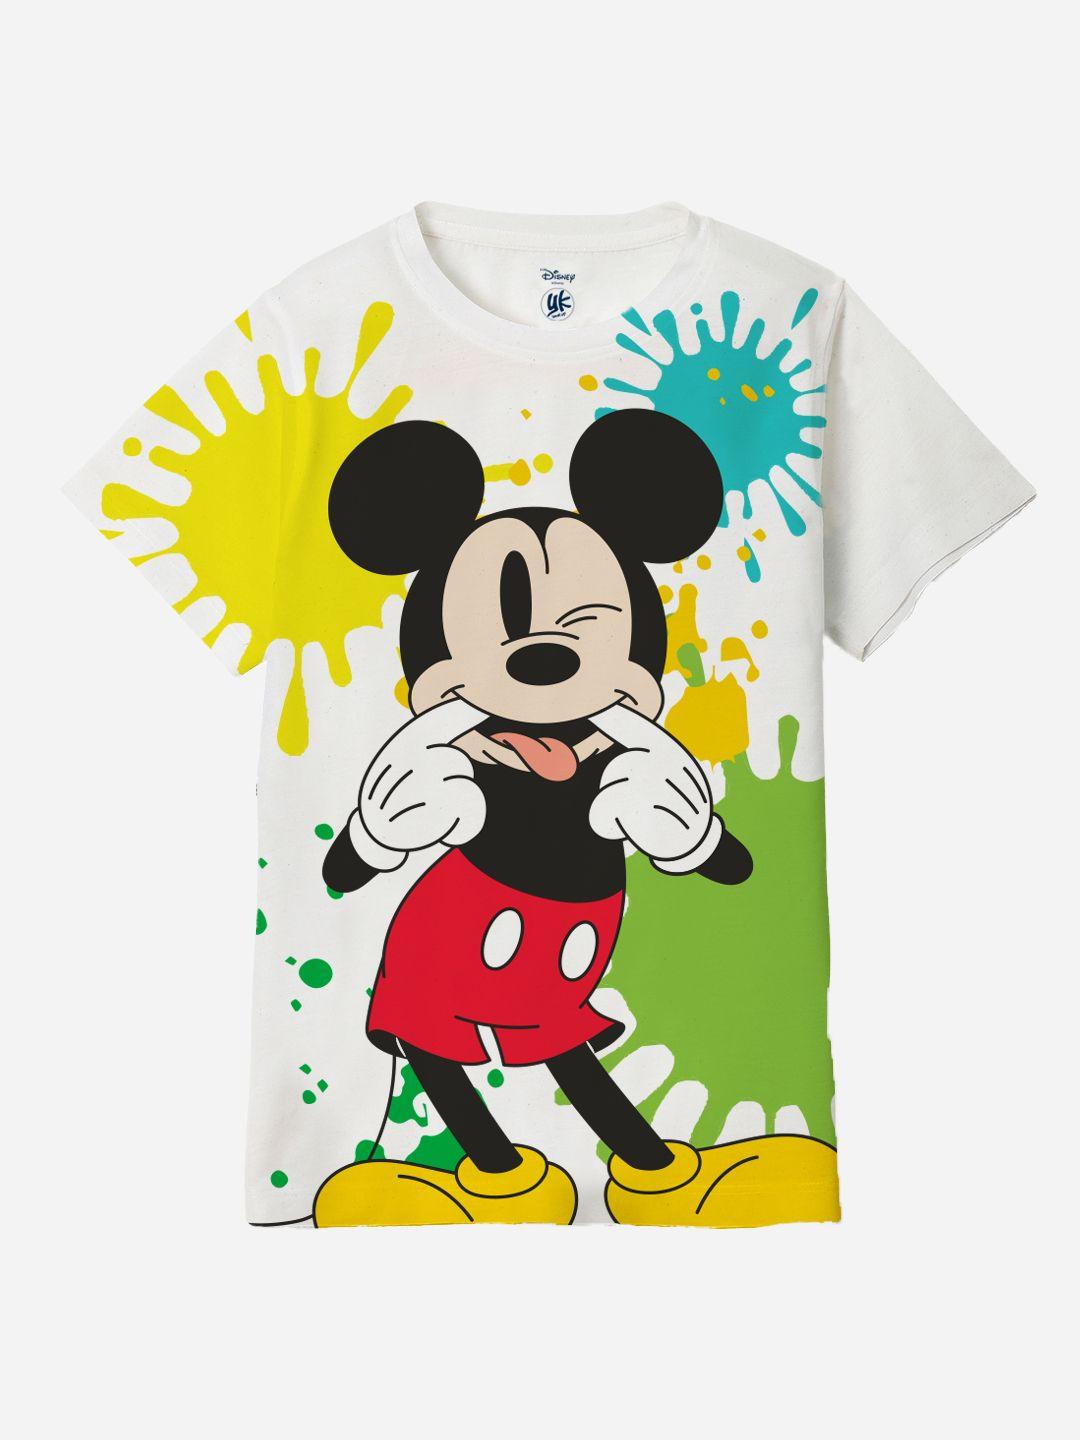 yk-disney-boys-mickey-mouse-humour-and-comic-printed-t-shirt